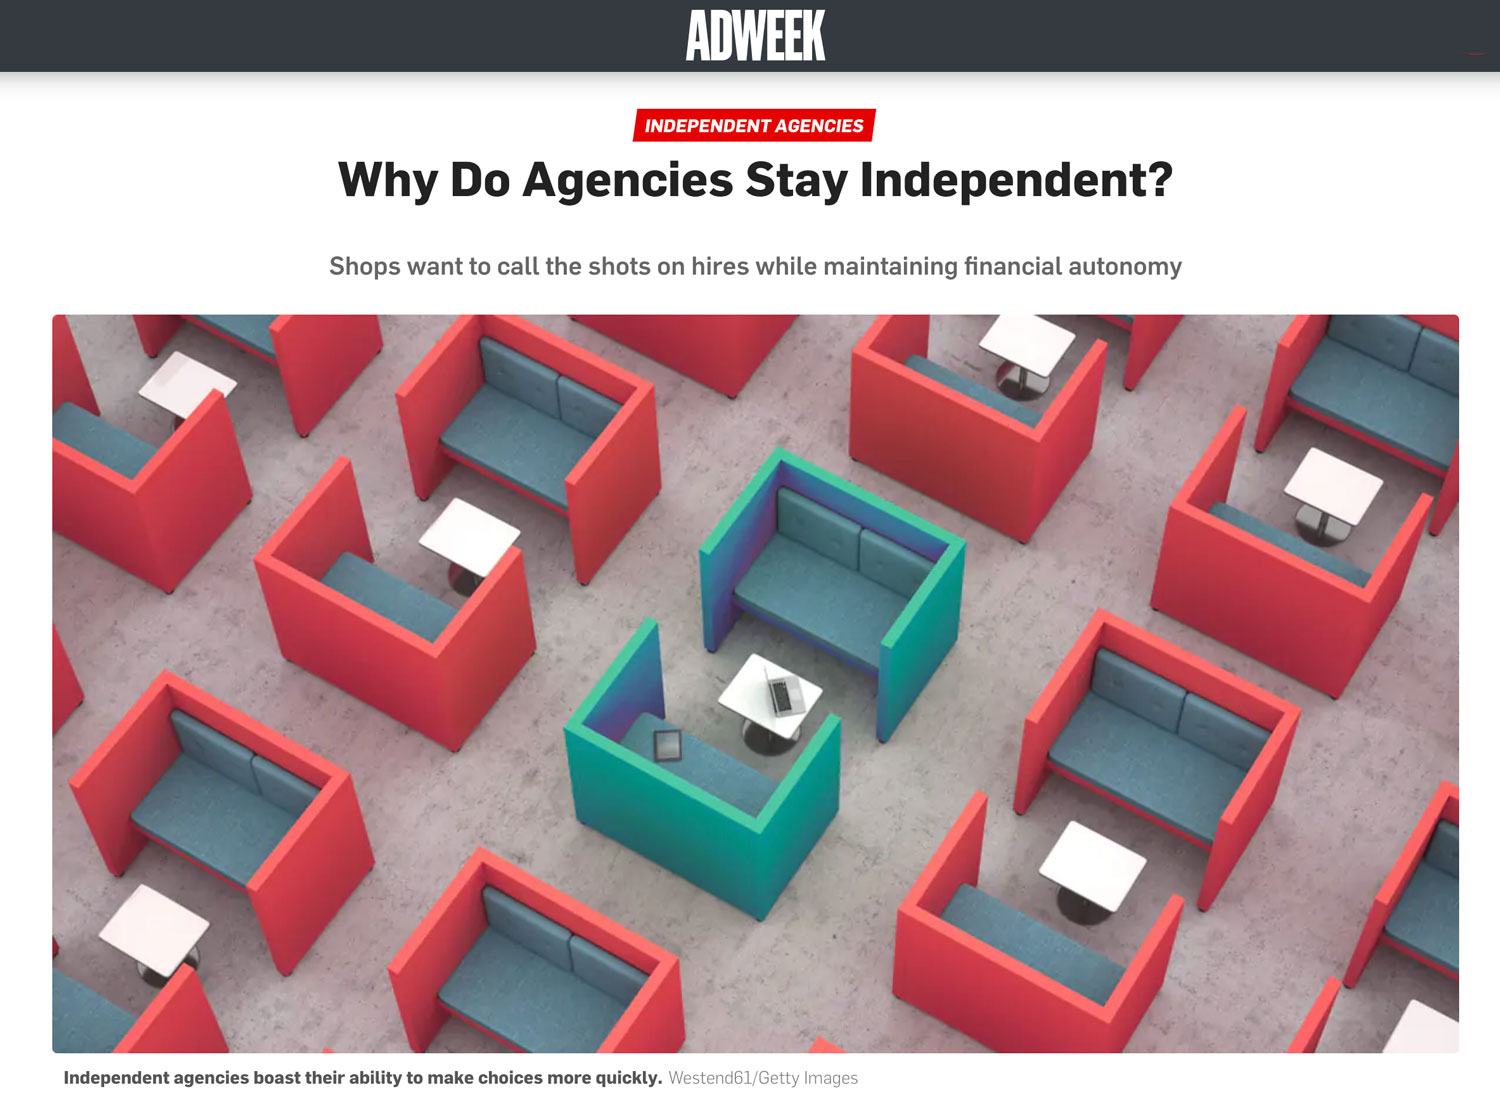 Adweek: Why do Agencies Stay Independent